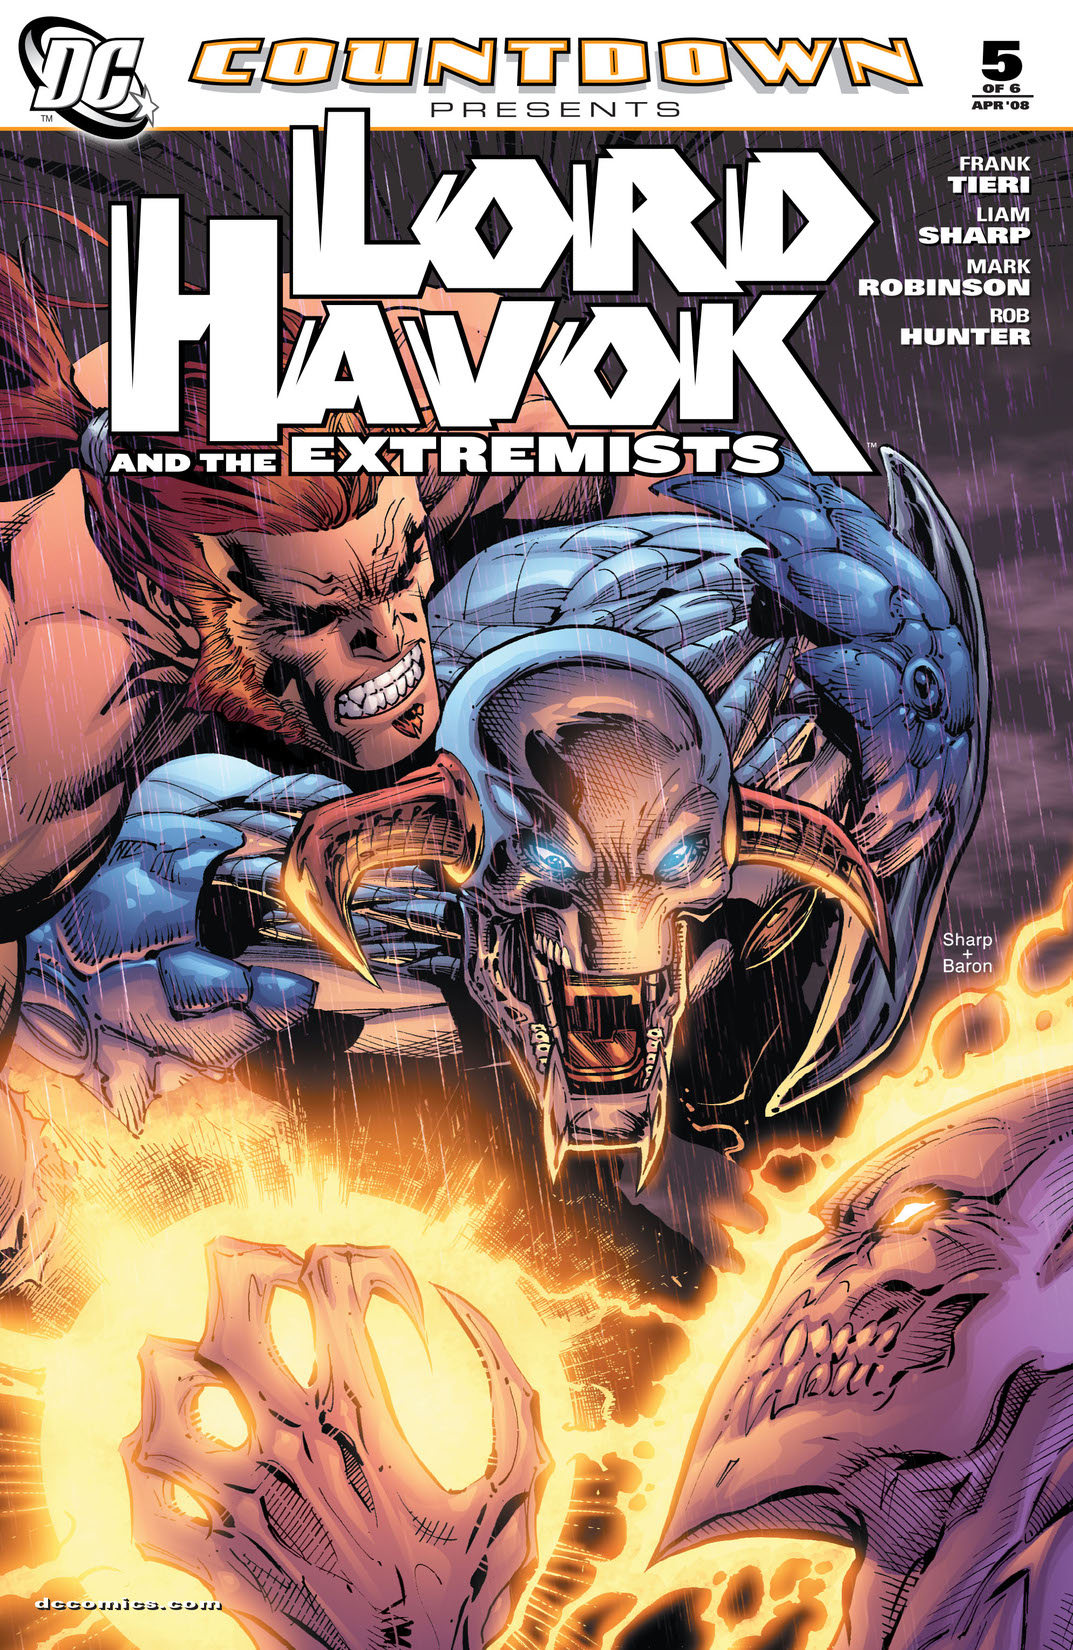 Countdown Presents: Lord Havok & the Extremists #5 preview images